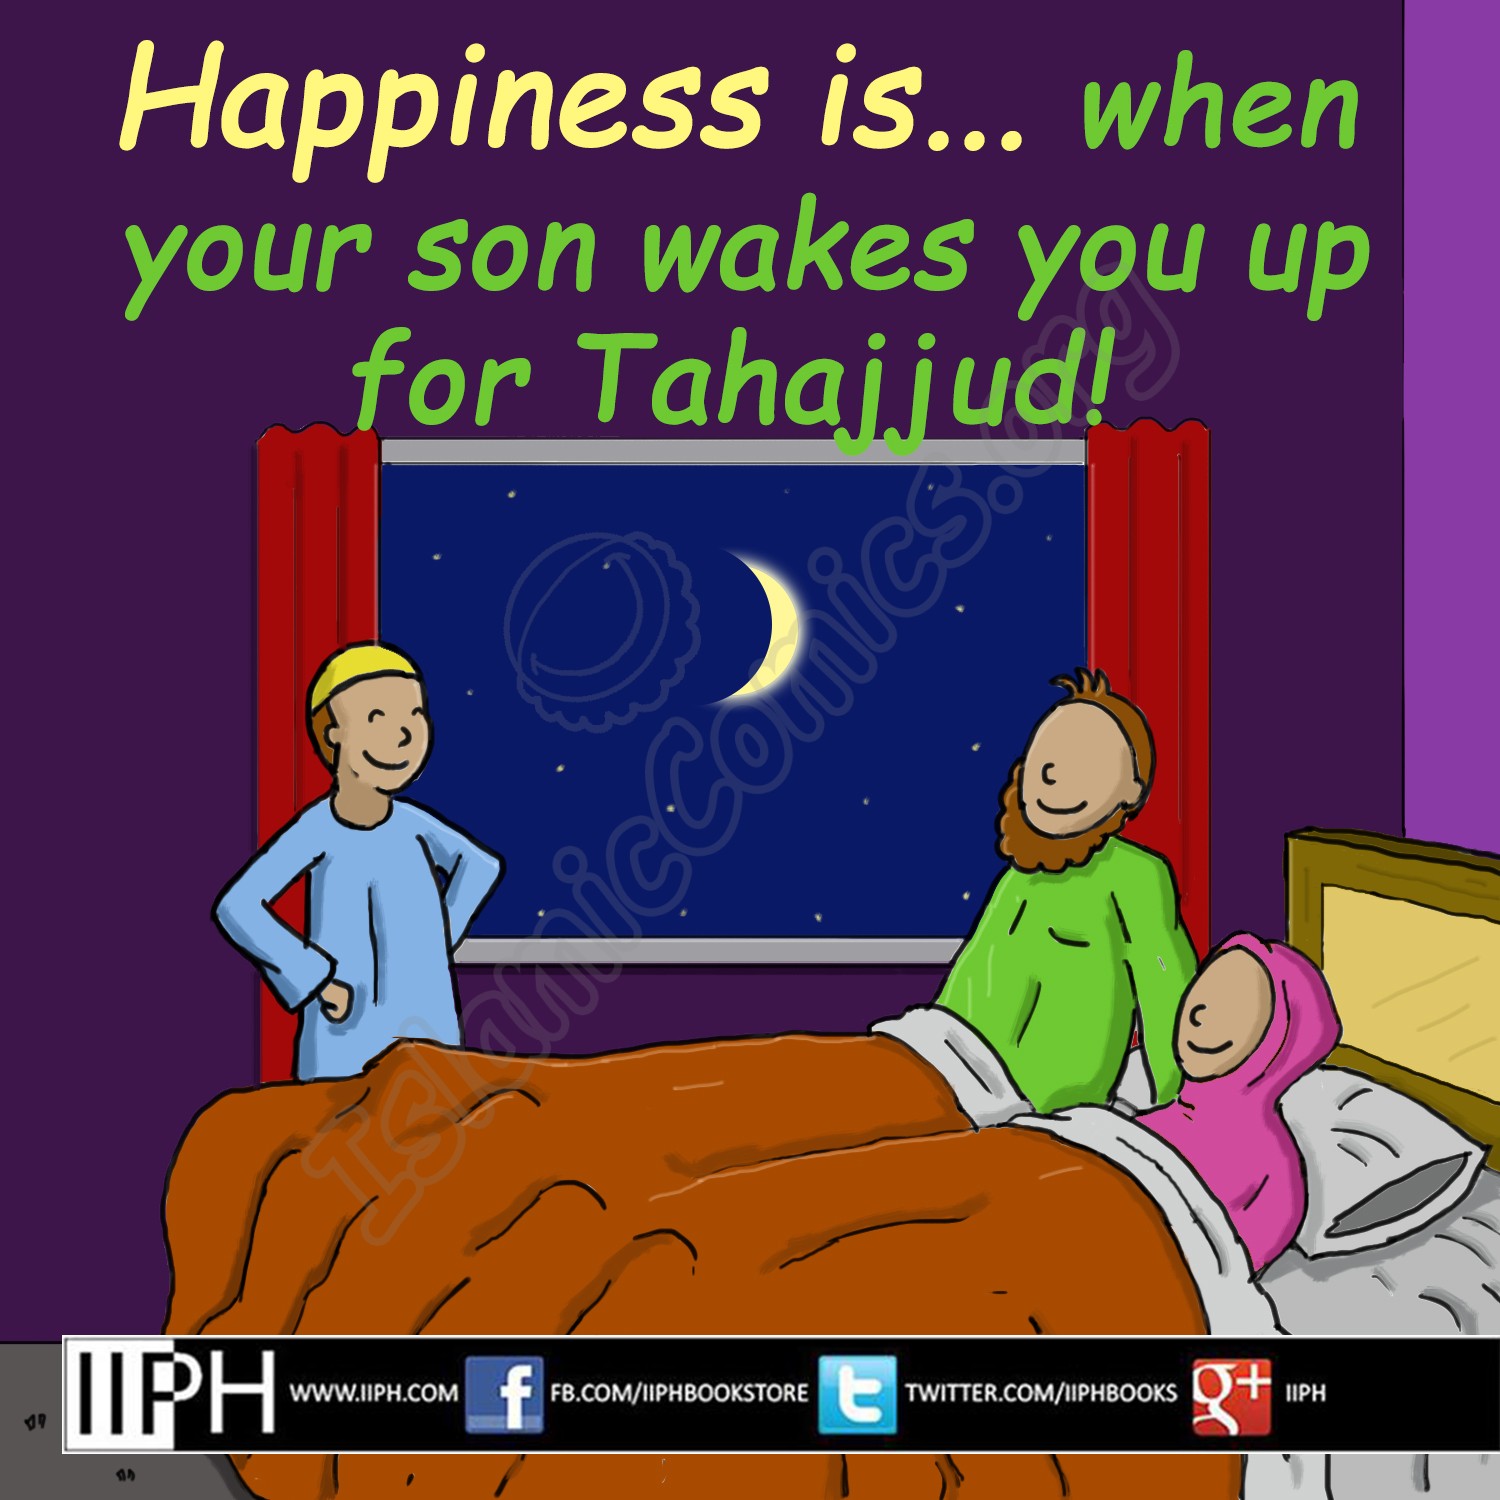 Happiness is when your son wakes you up for Tahajjud - Islamic Illustrations (Islamic Comics)